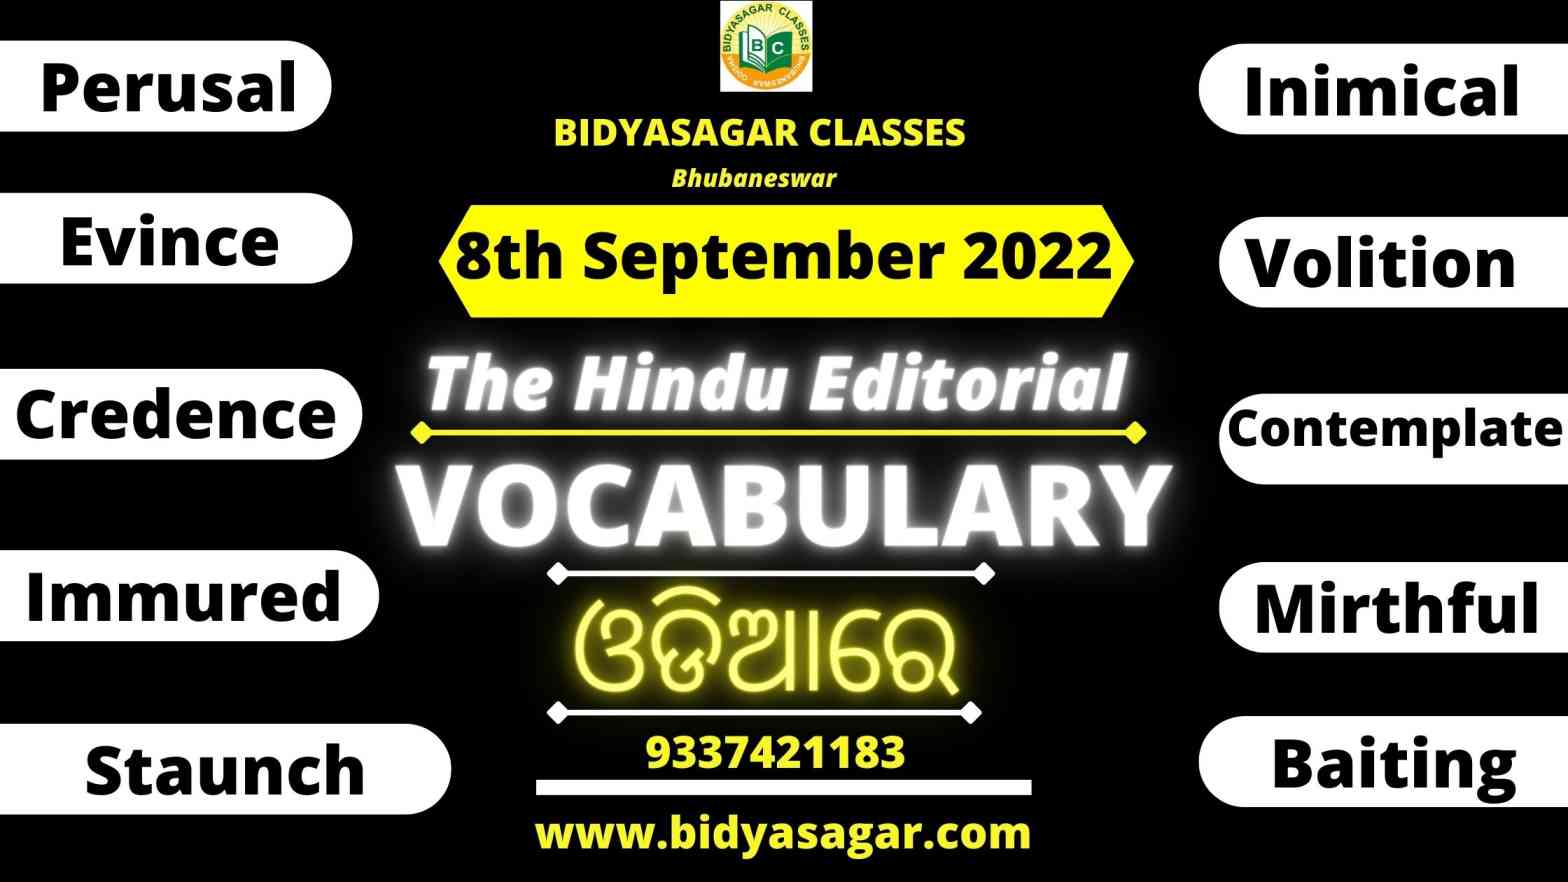 The Hindu Editorial Vocabulary of 8th September 2022